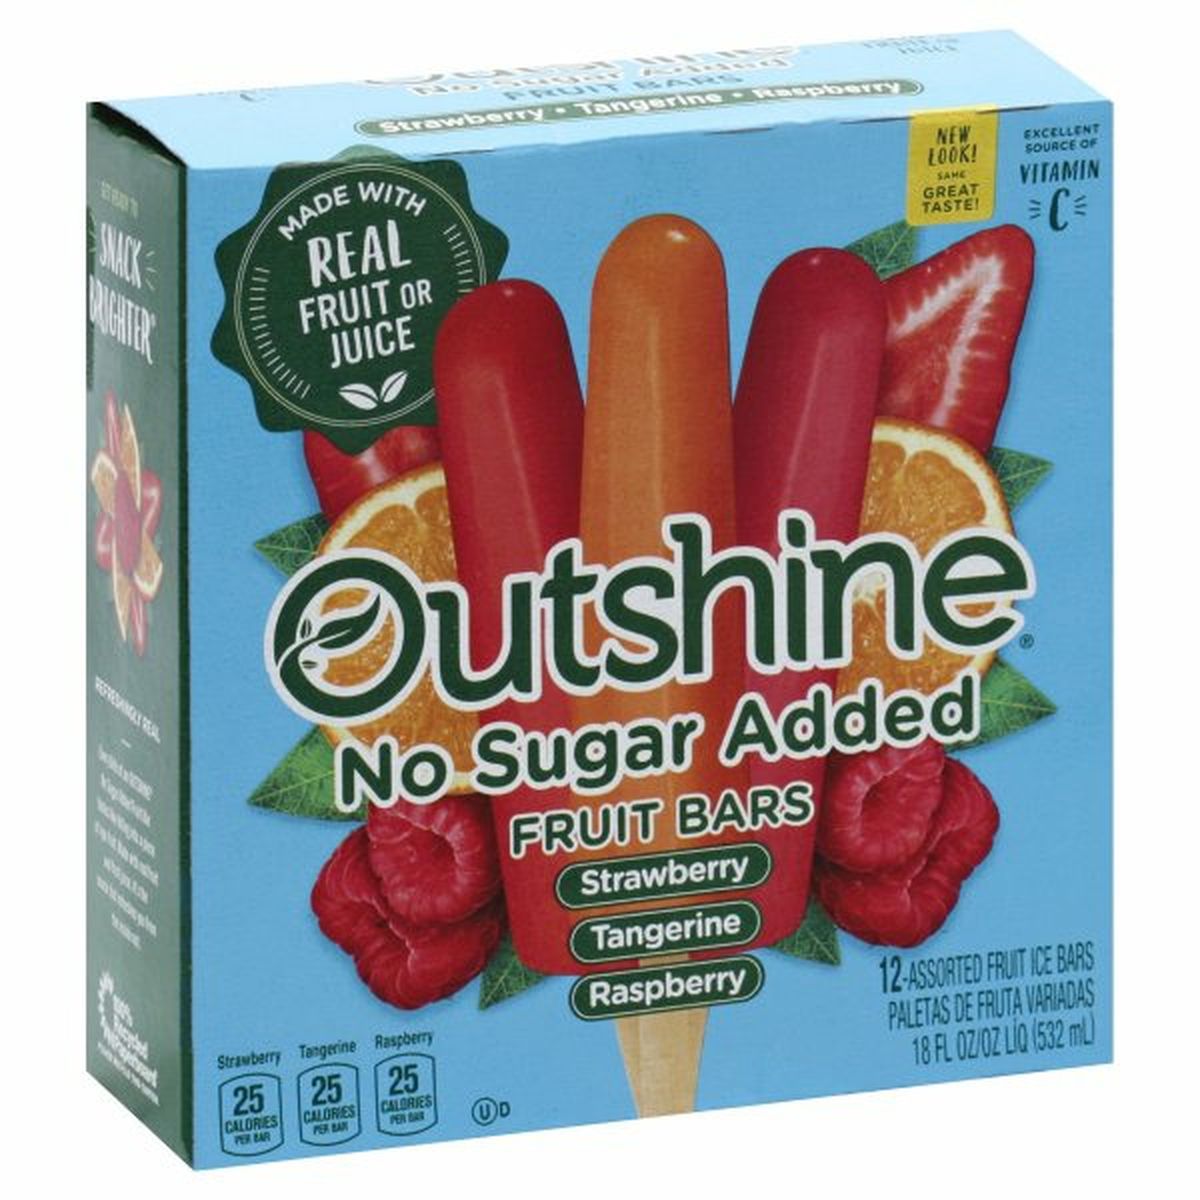 Calories in Outshine Fruit Bars, No Sugar Added, Strawberry/Tangerine/Raspberry